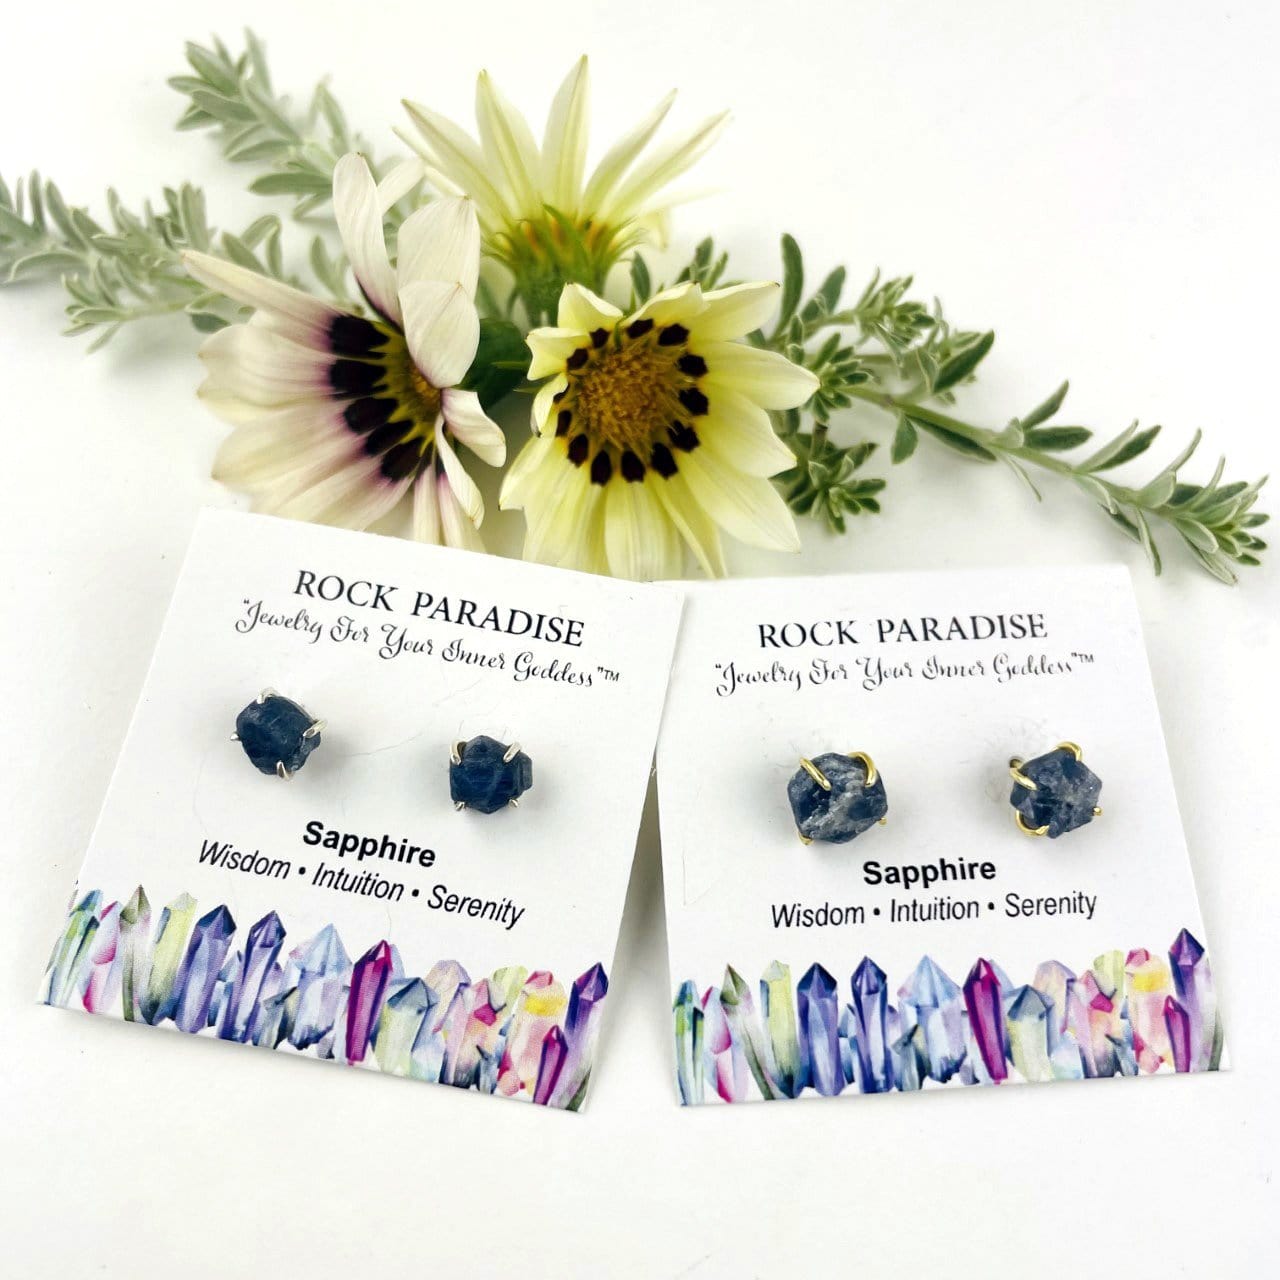 Sapphire Gemstone Stud Earrings in gold and silver